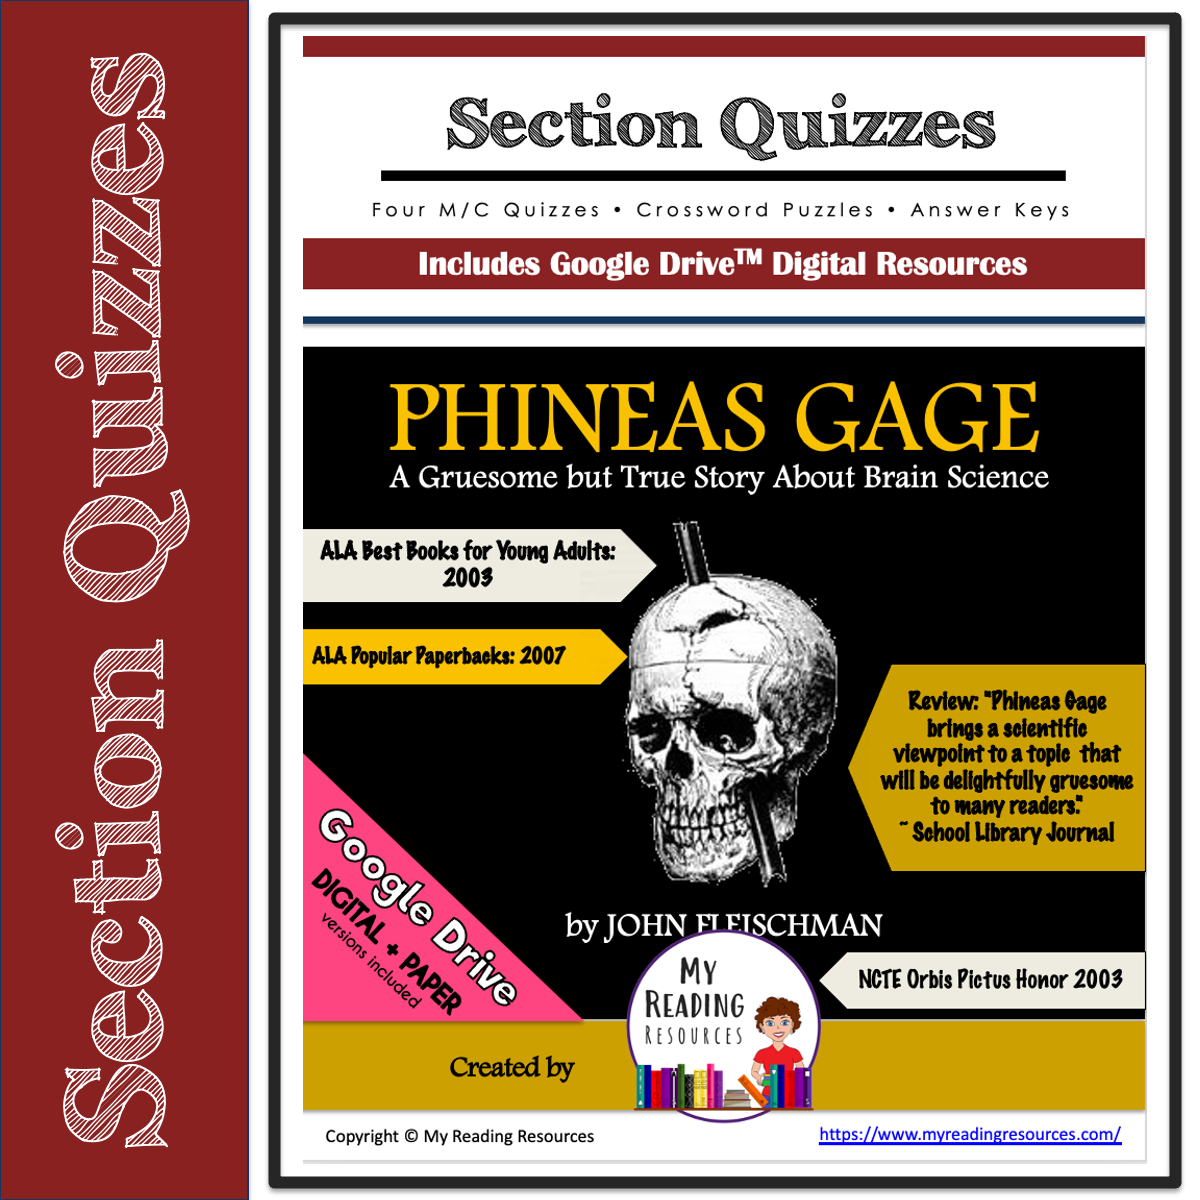 Gage　Puzzles　Resources　My　Reading　Phineas　Quizzes　Section　Crossword